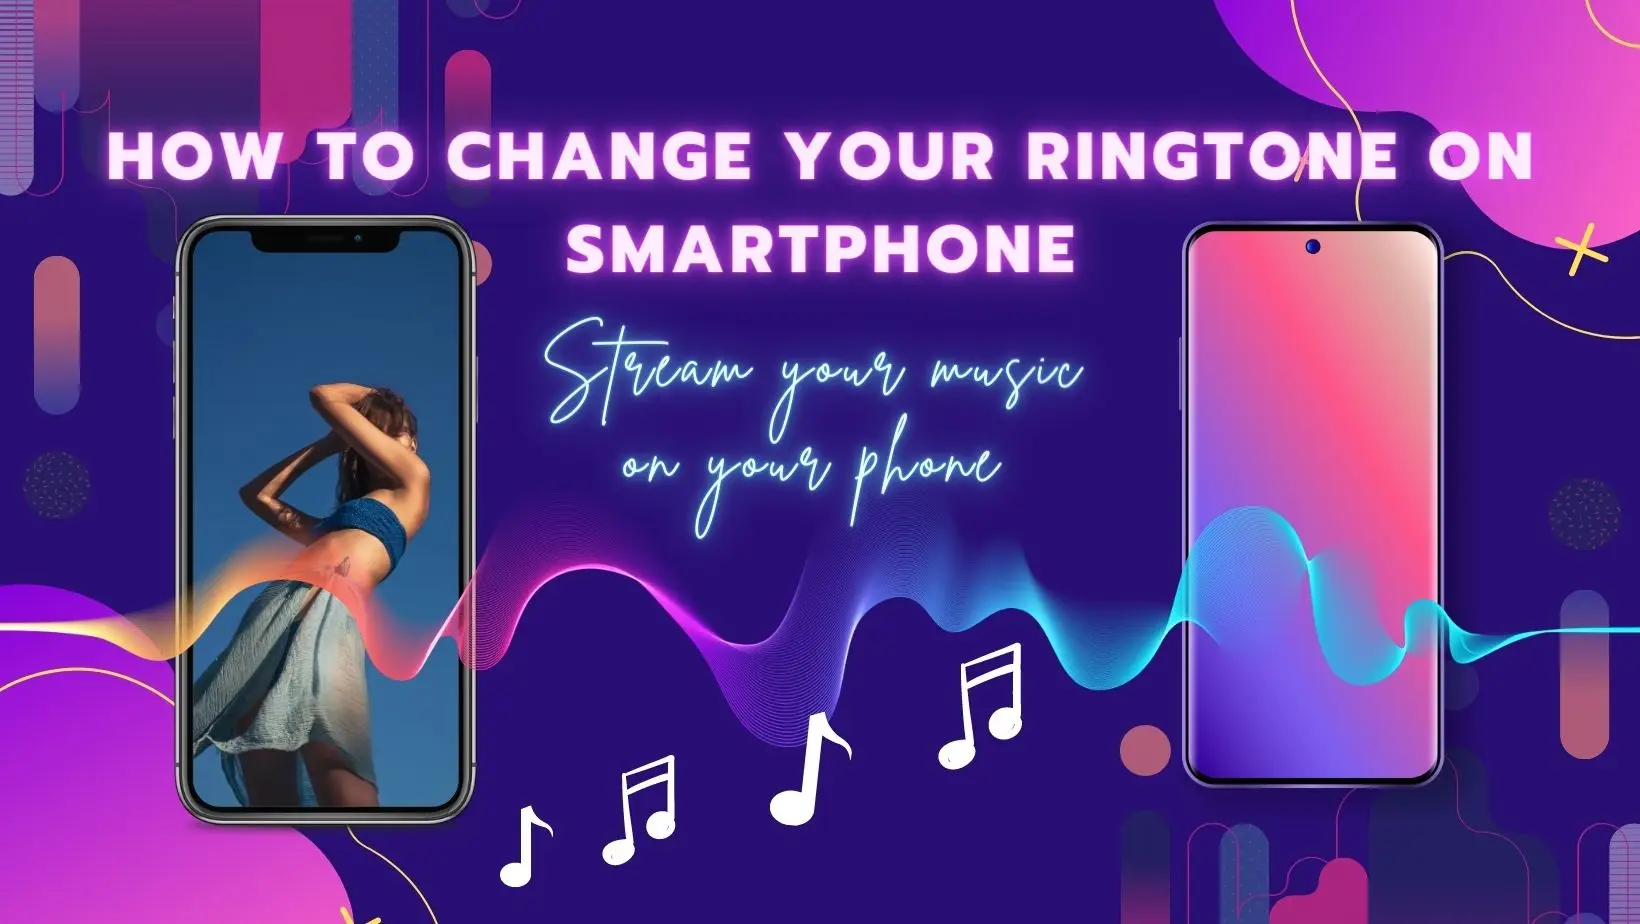 How To Change Your Ringtone On Smartphone